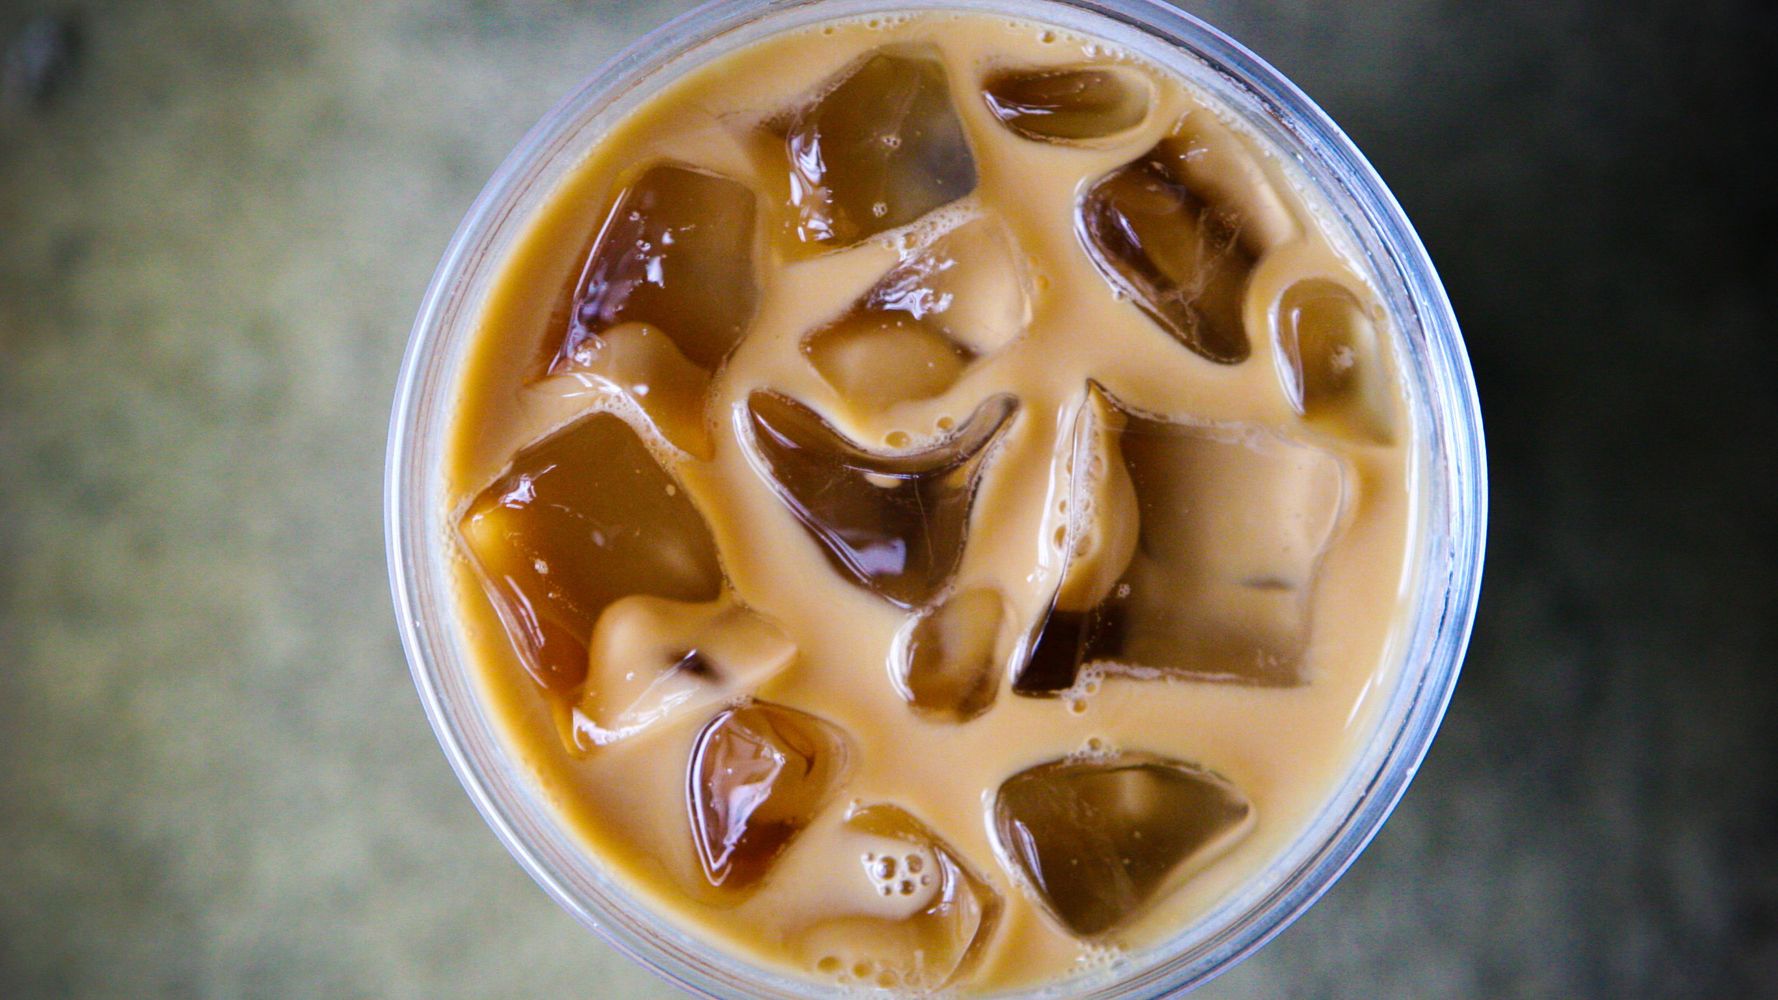 Starbucks Tests Coffee Ice Cubes for Cold Drinks